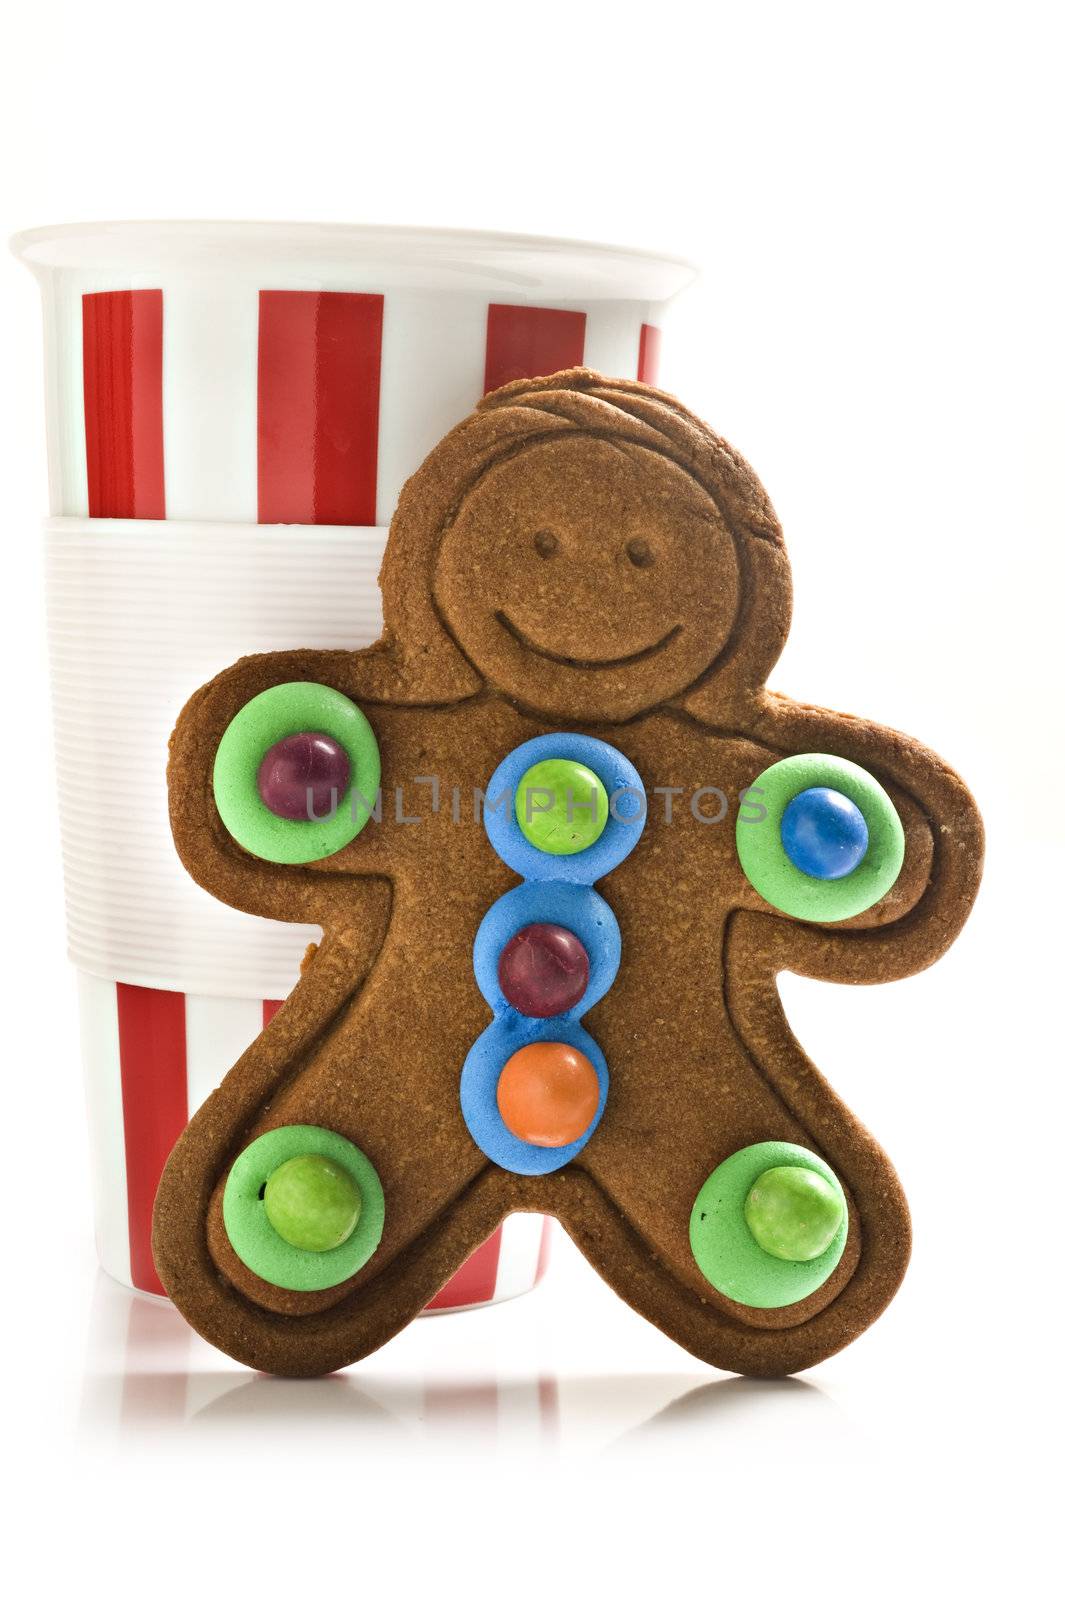 Red and white coffee mug with colorful gingerbread man